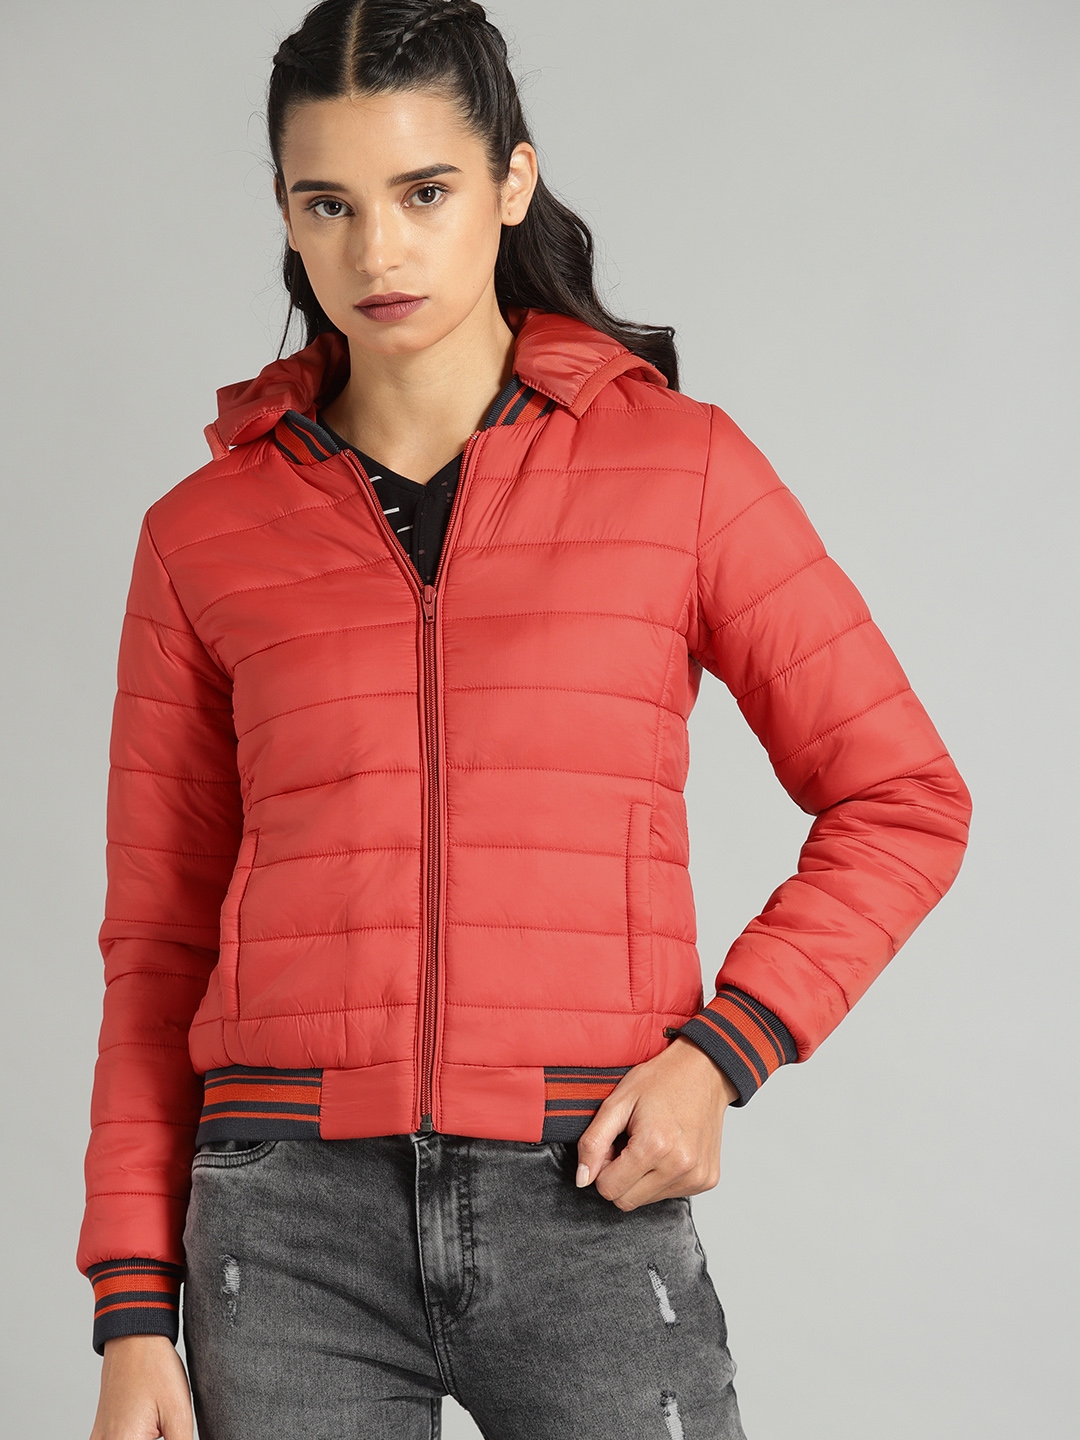 Buy The Roadster Lifestyle Co Women Rust Red Solid Puffer Jacket ...